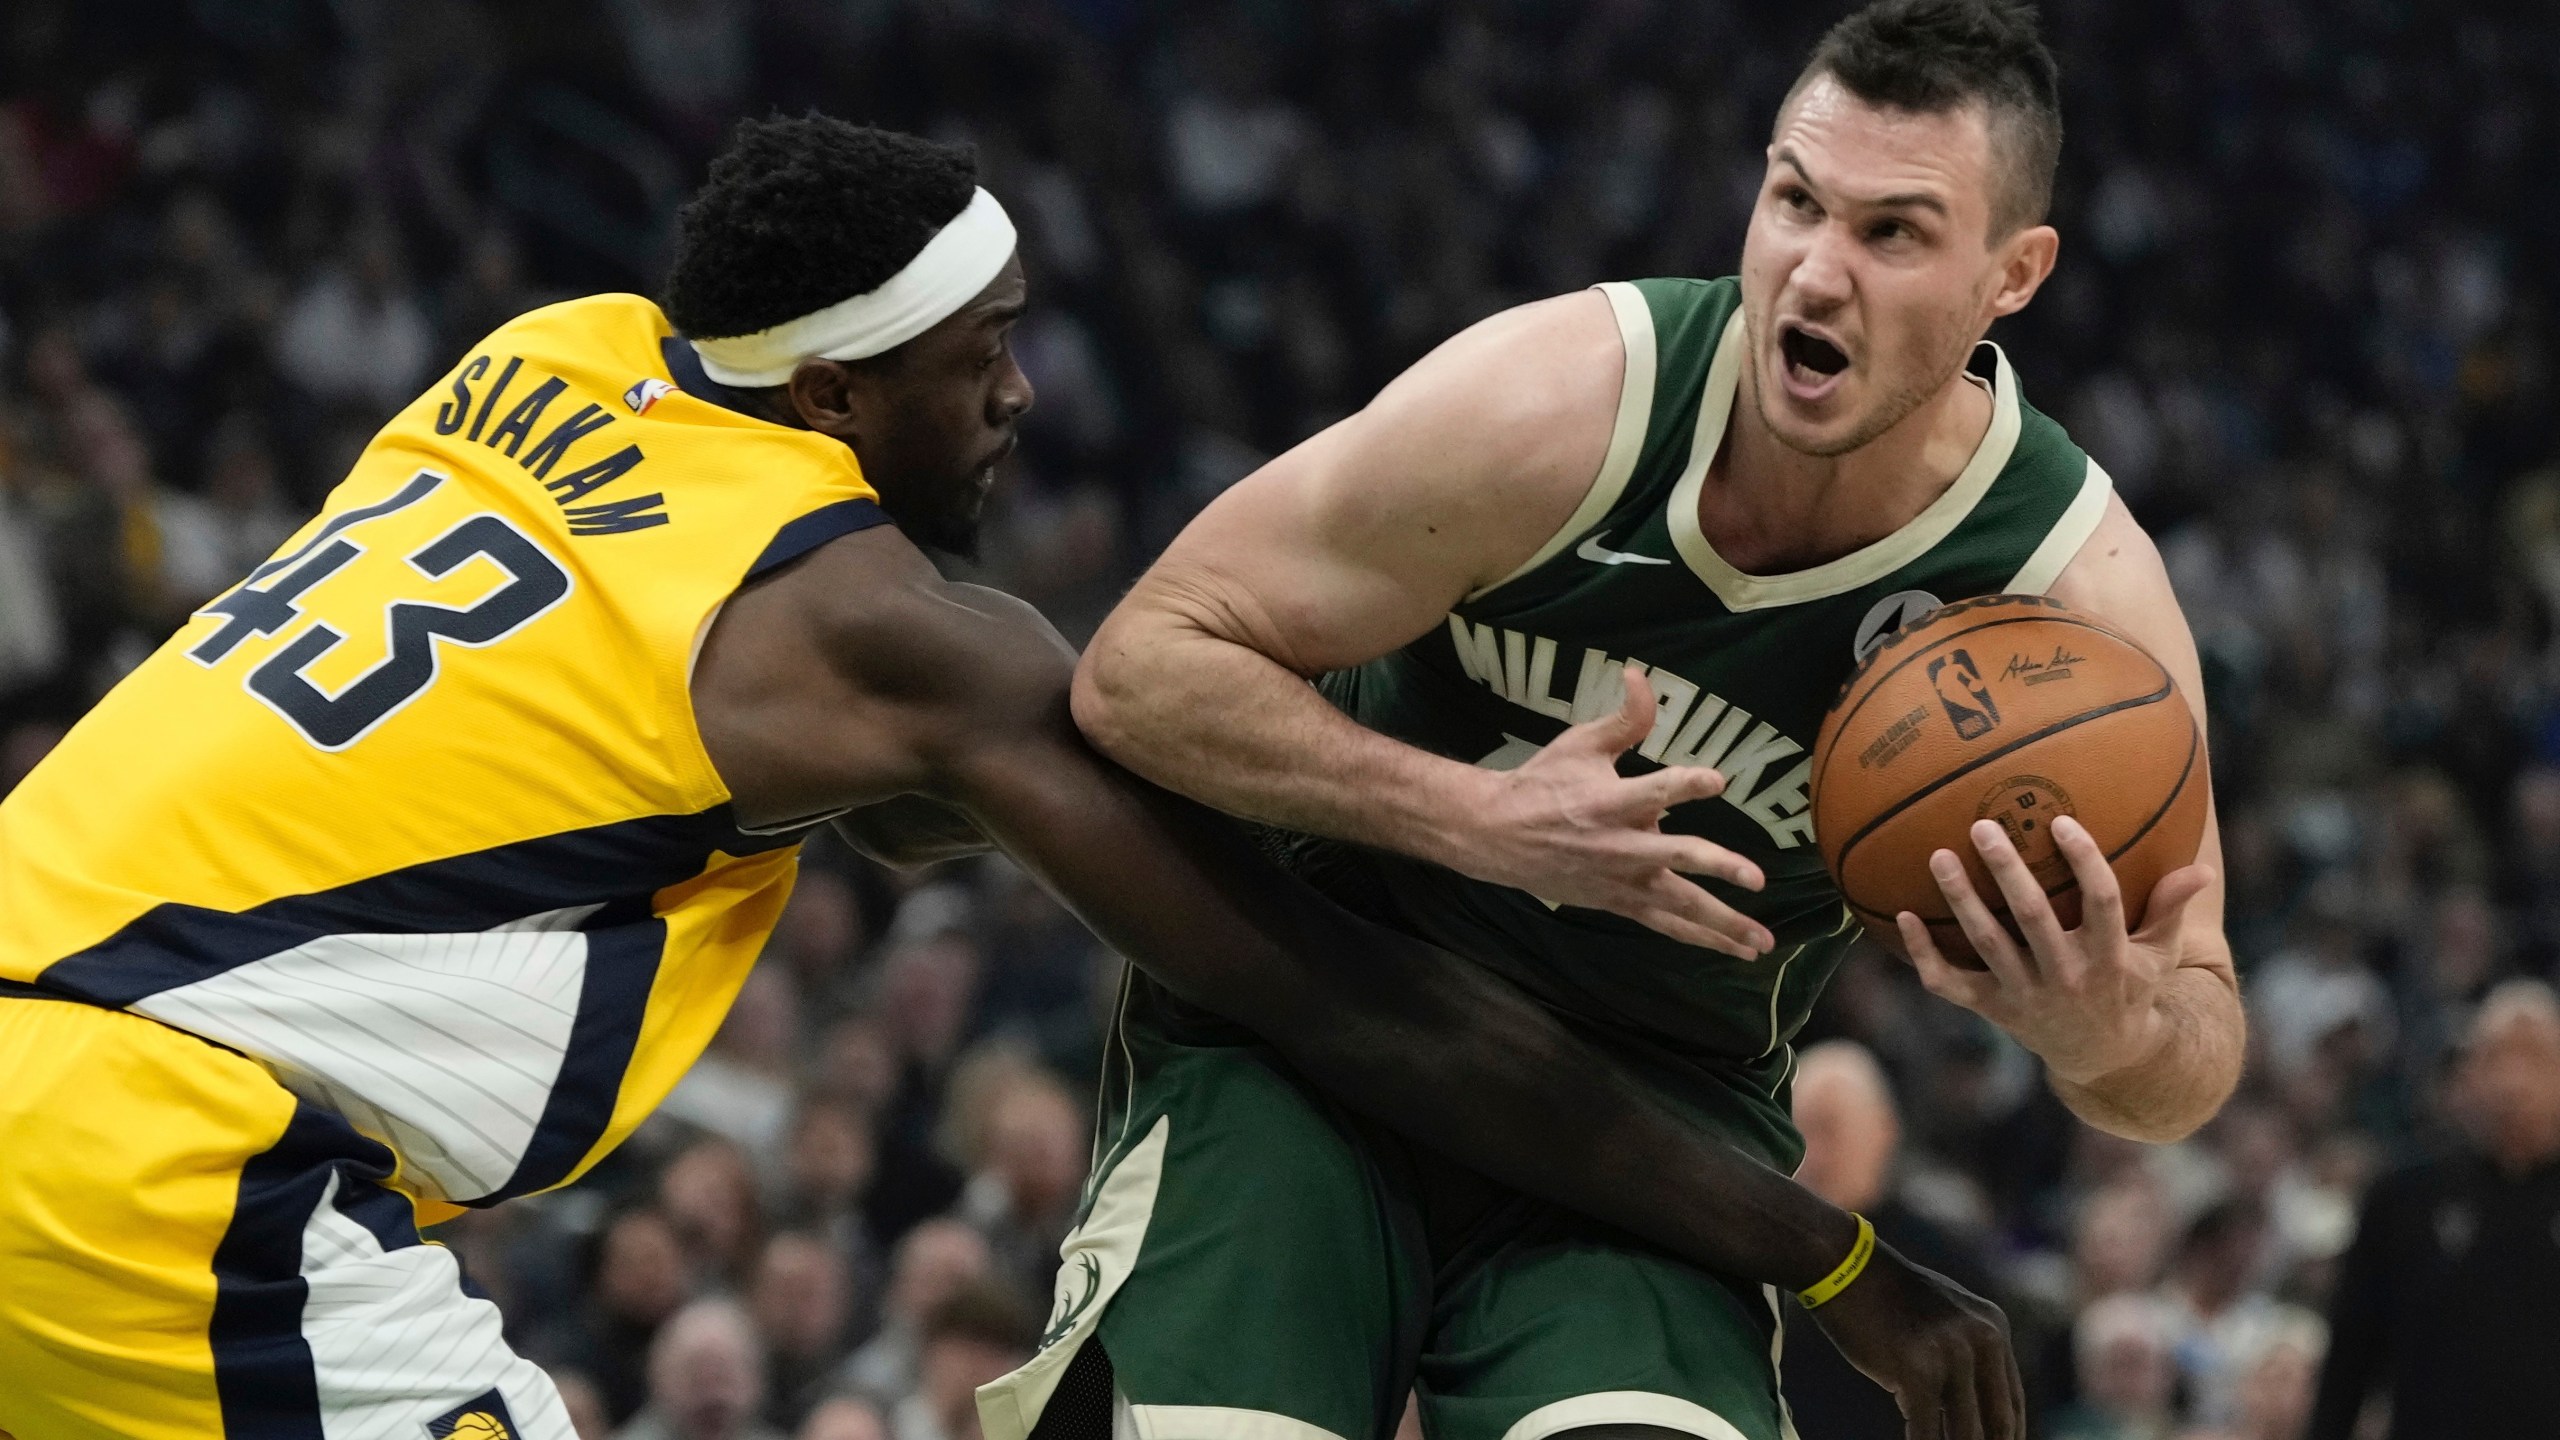 Middleton, Portis each score 29 as Bucks stay alive with 115-92 victory  over Pacers in Game 5 | CW39 Houston